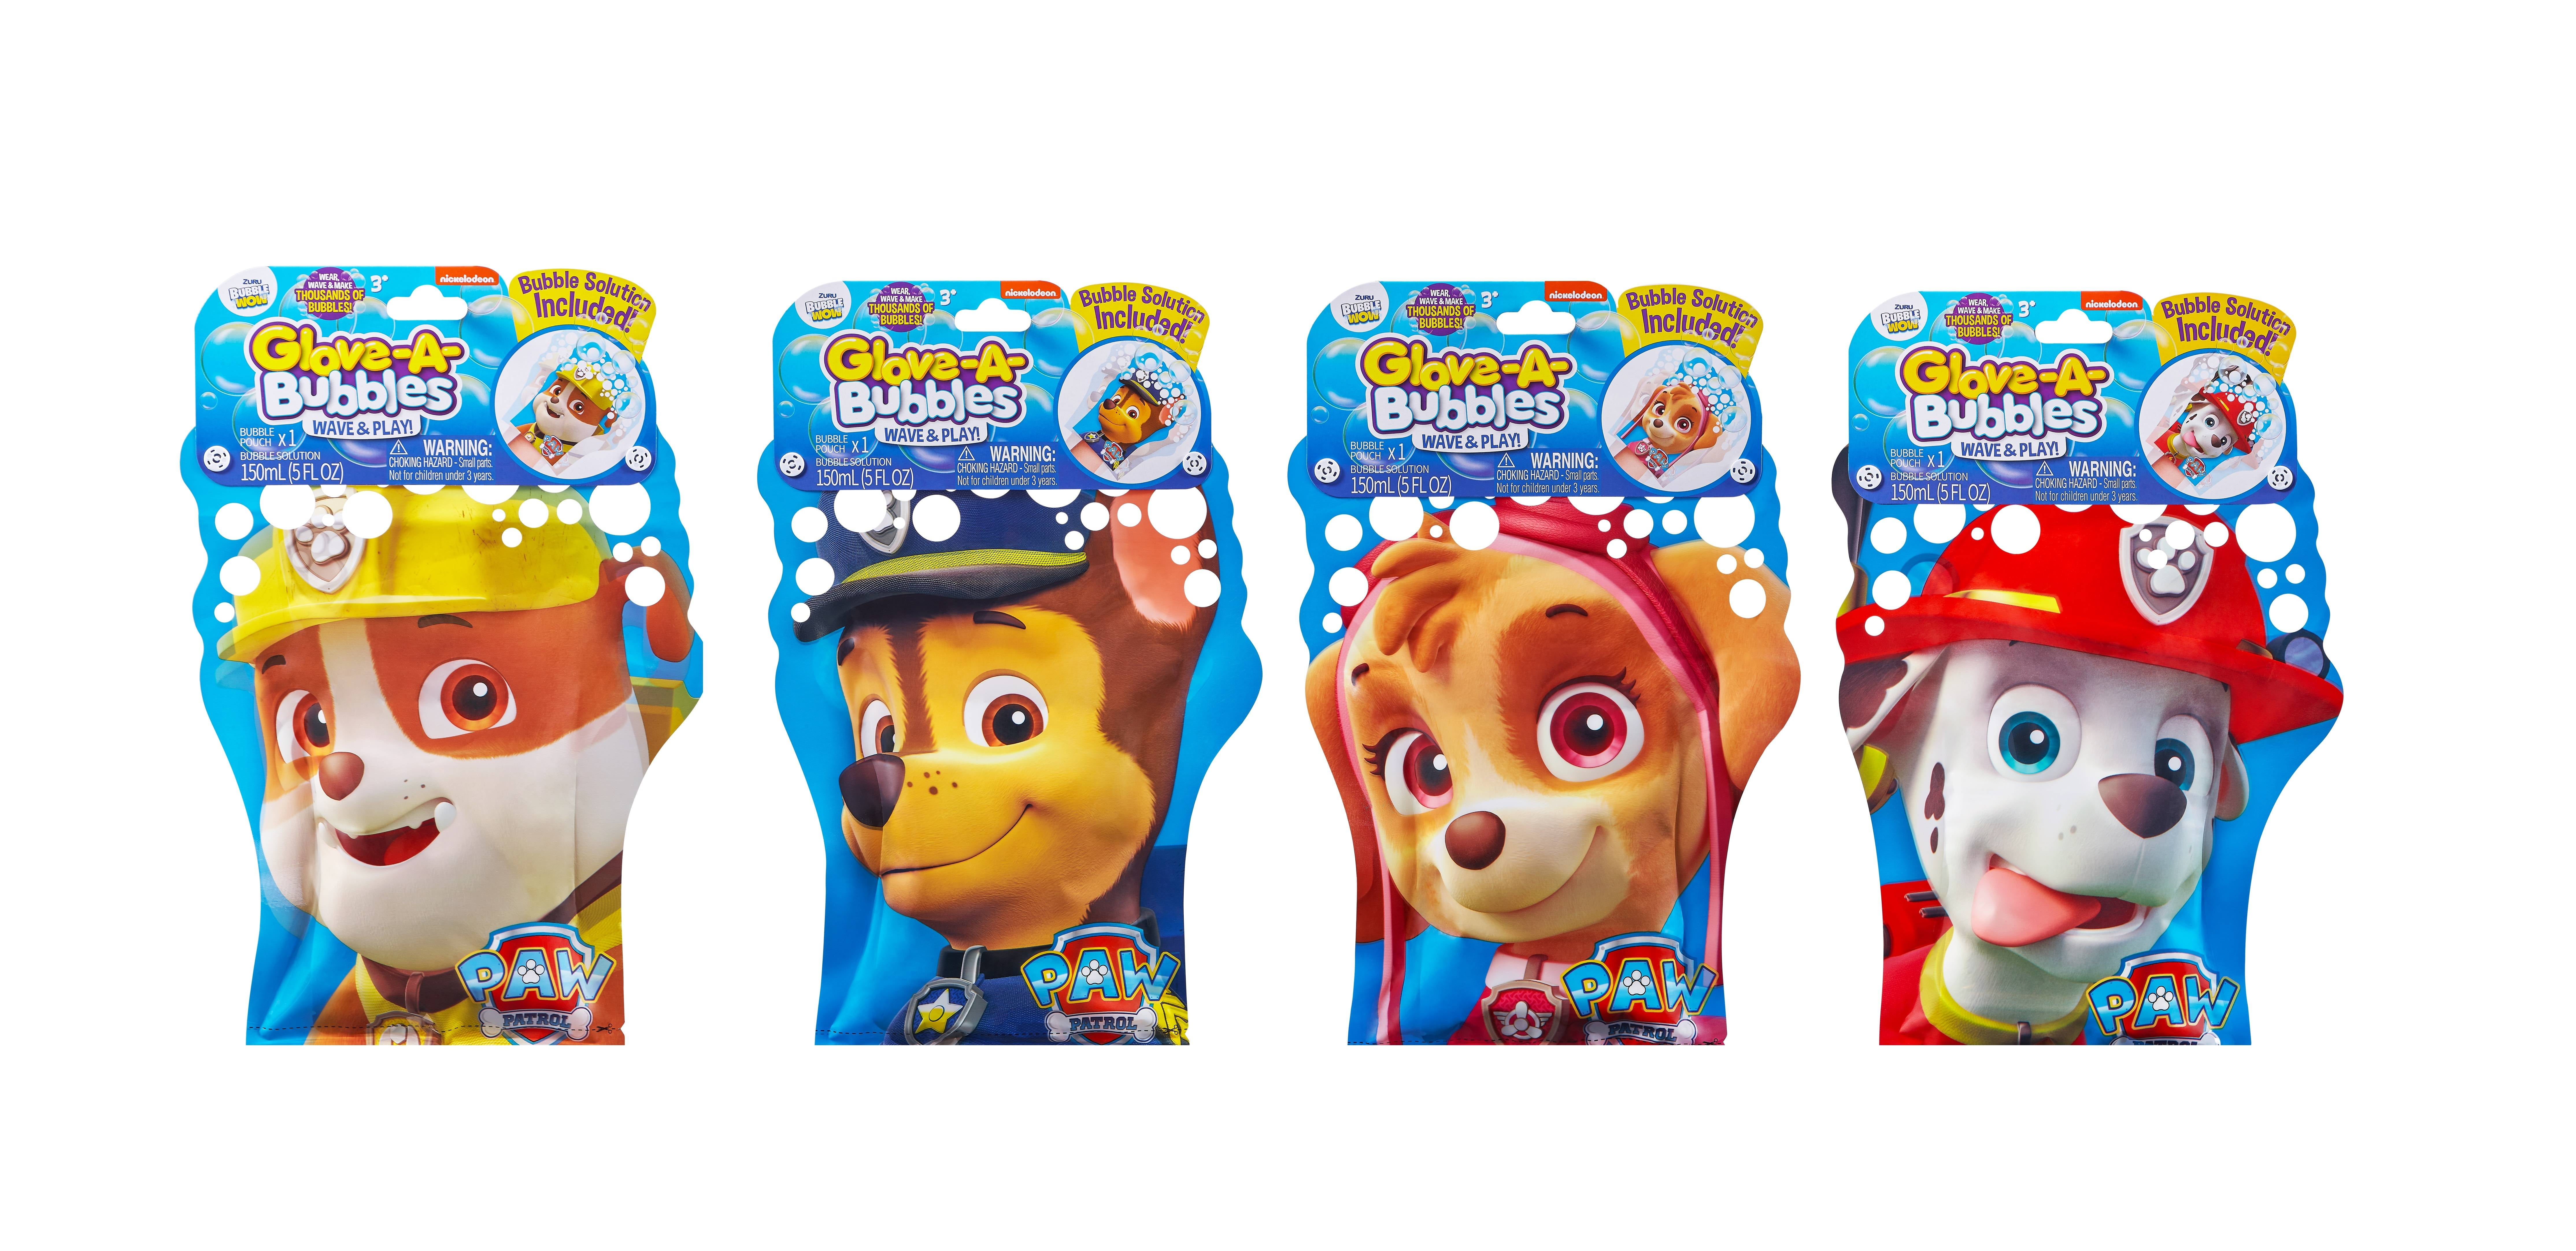 PAW PATROL Personalized Birthday Party Favors pack of 12 Bubbles 